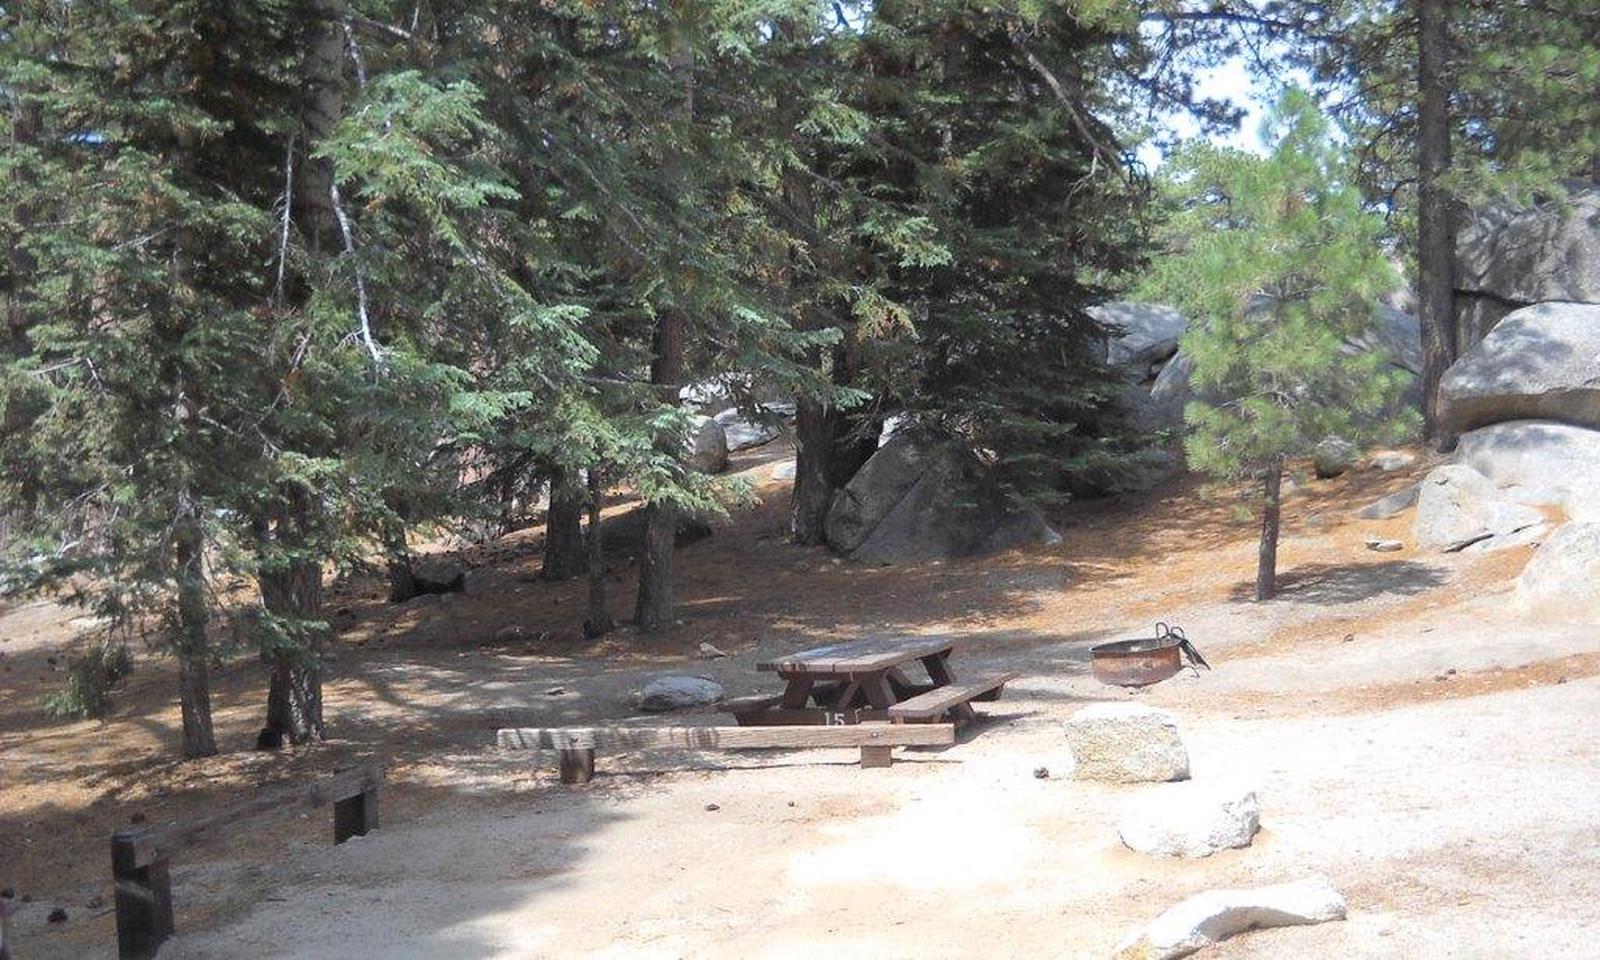 Boulder Basin campsite 15 with picnic table, fire pit and parking area.